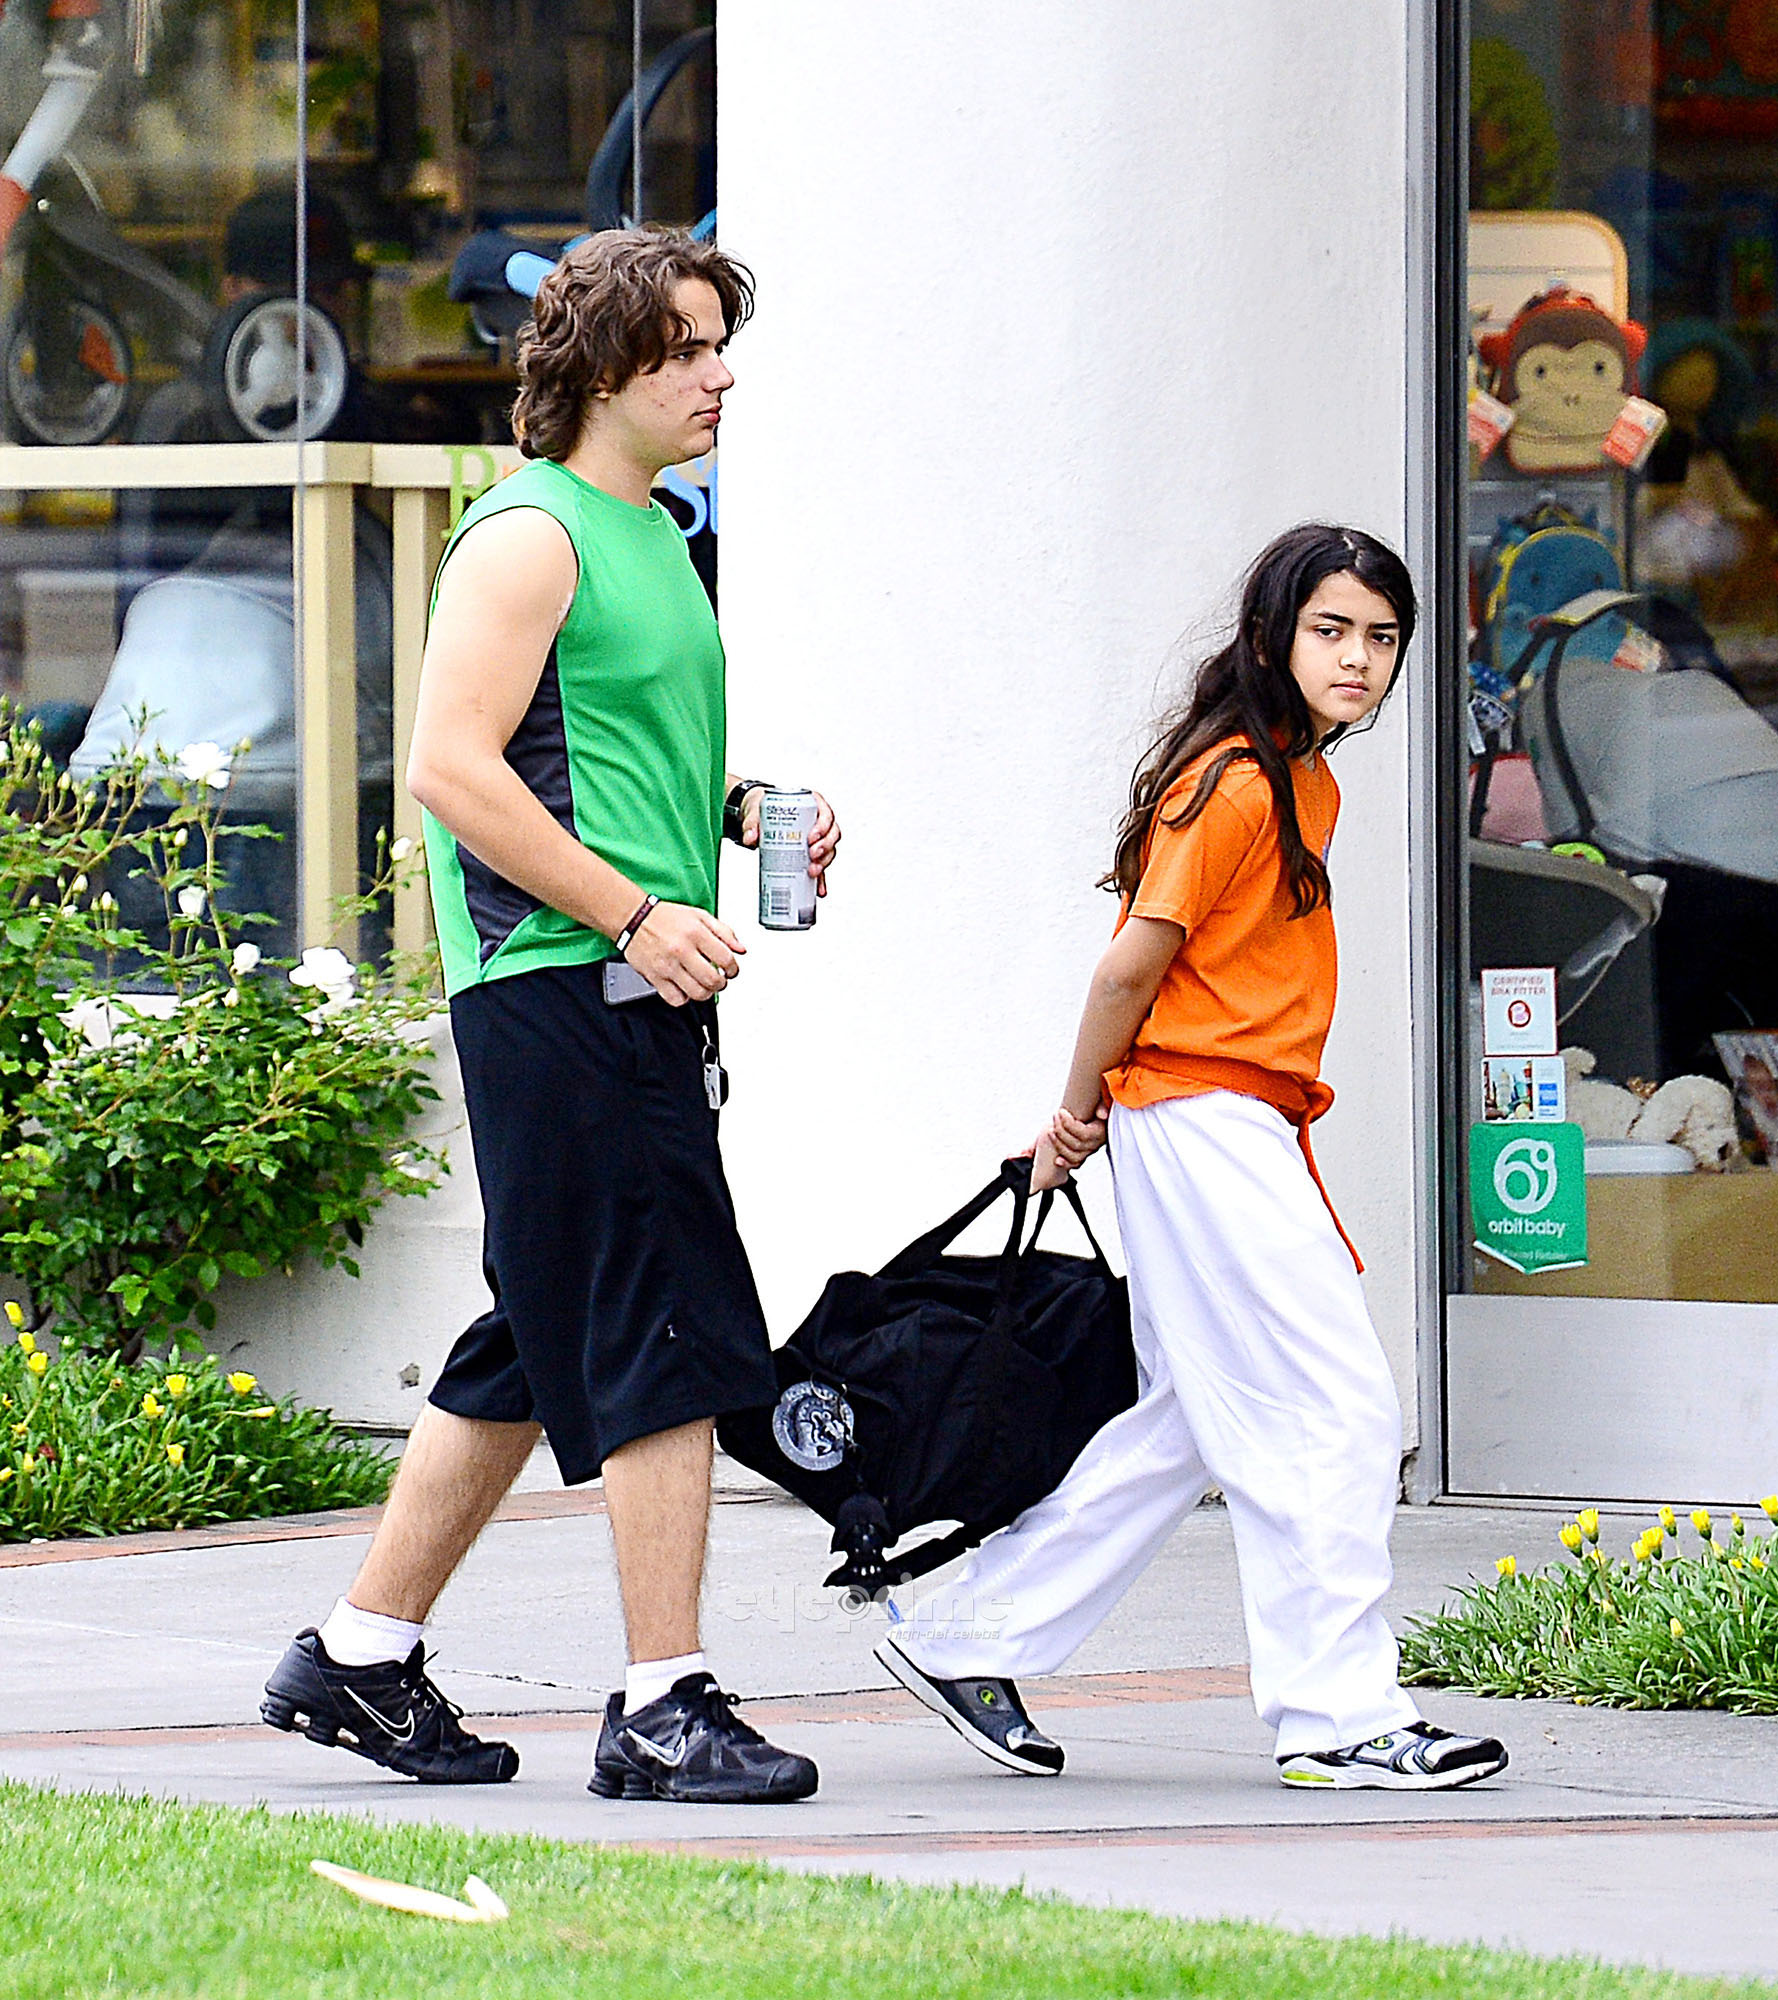 Prince Jackson and his brother Blanket Jackson at the Karate in Encino NEW May 2013 ♥♥